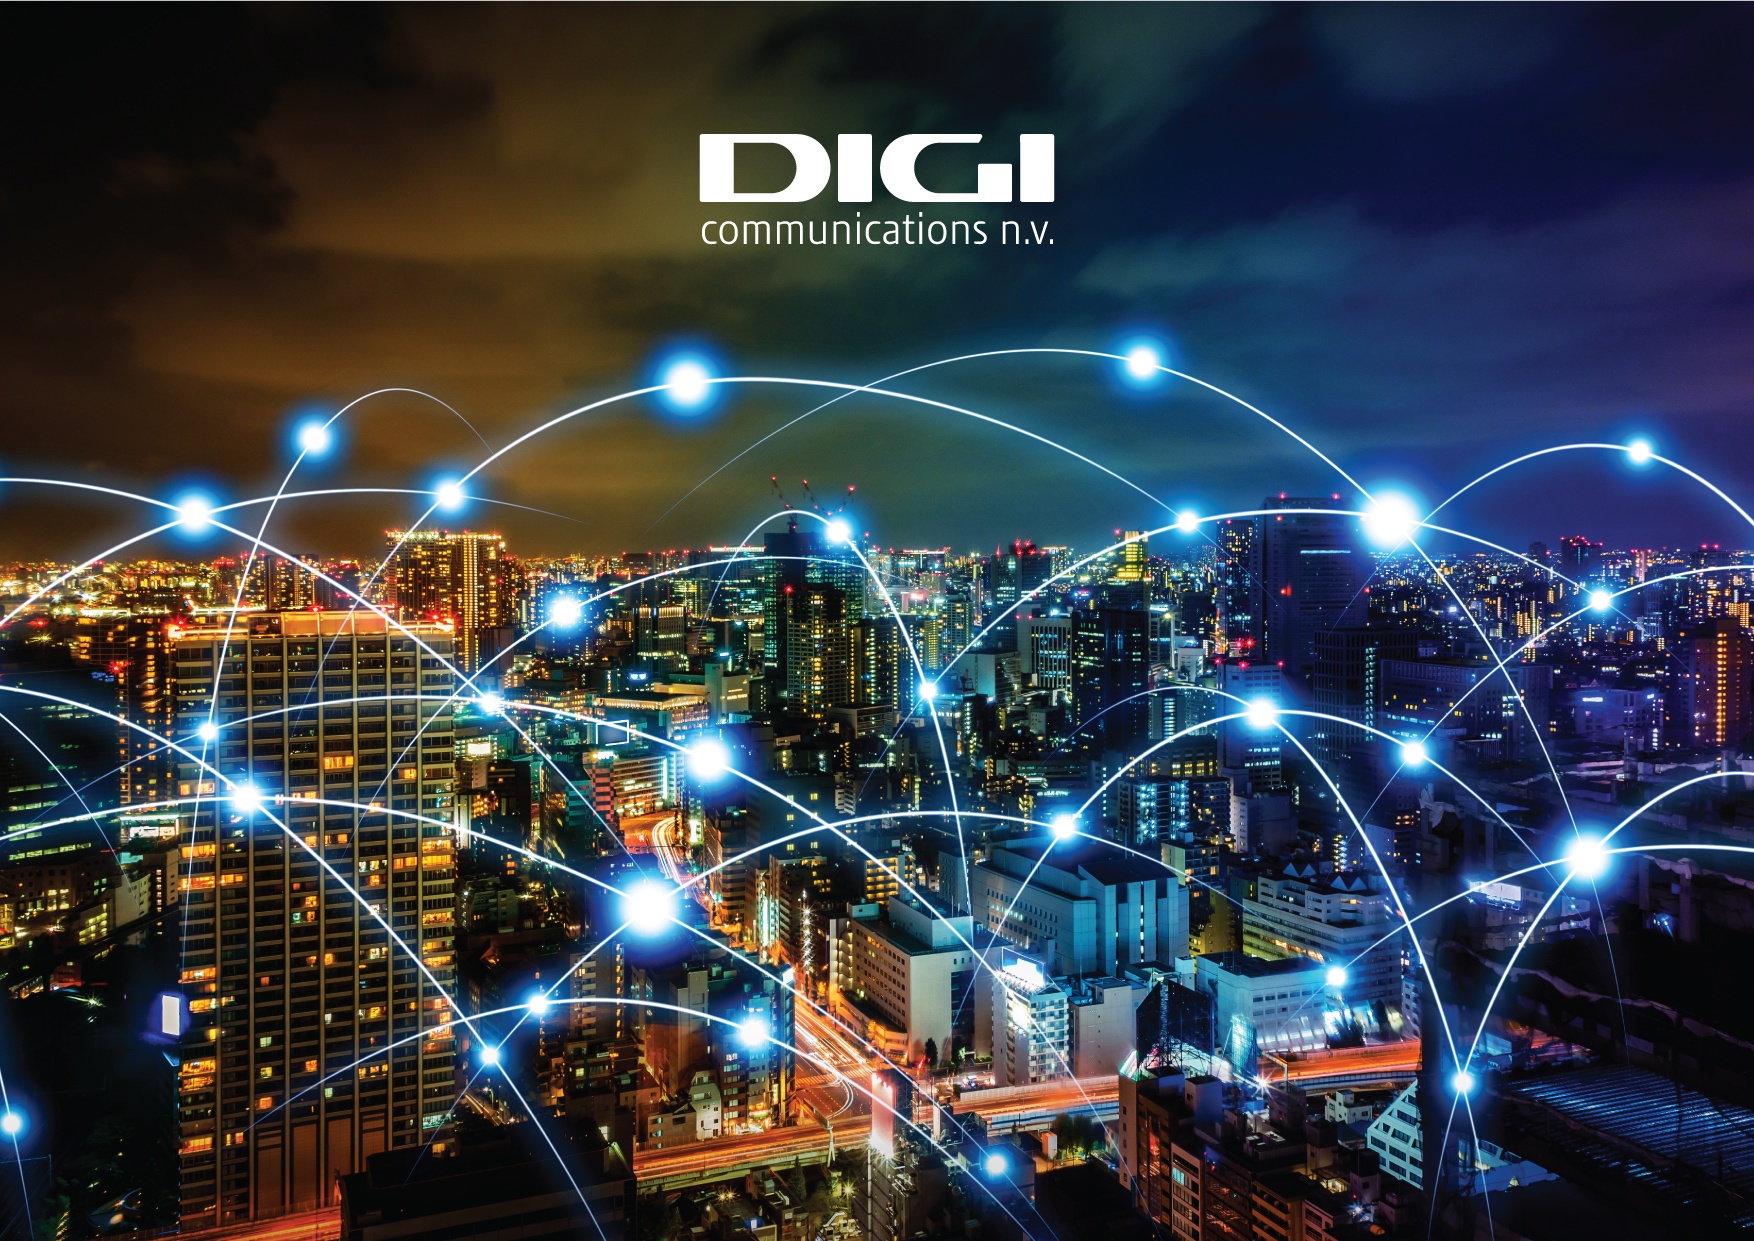 Digi Communications N.V. announces the exercise of conditional share options by an executive director of the Company, for the year 2022, as approved by the Company’s Ordinary General Shareholders’ Meeting from 18 May 2021